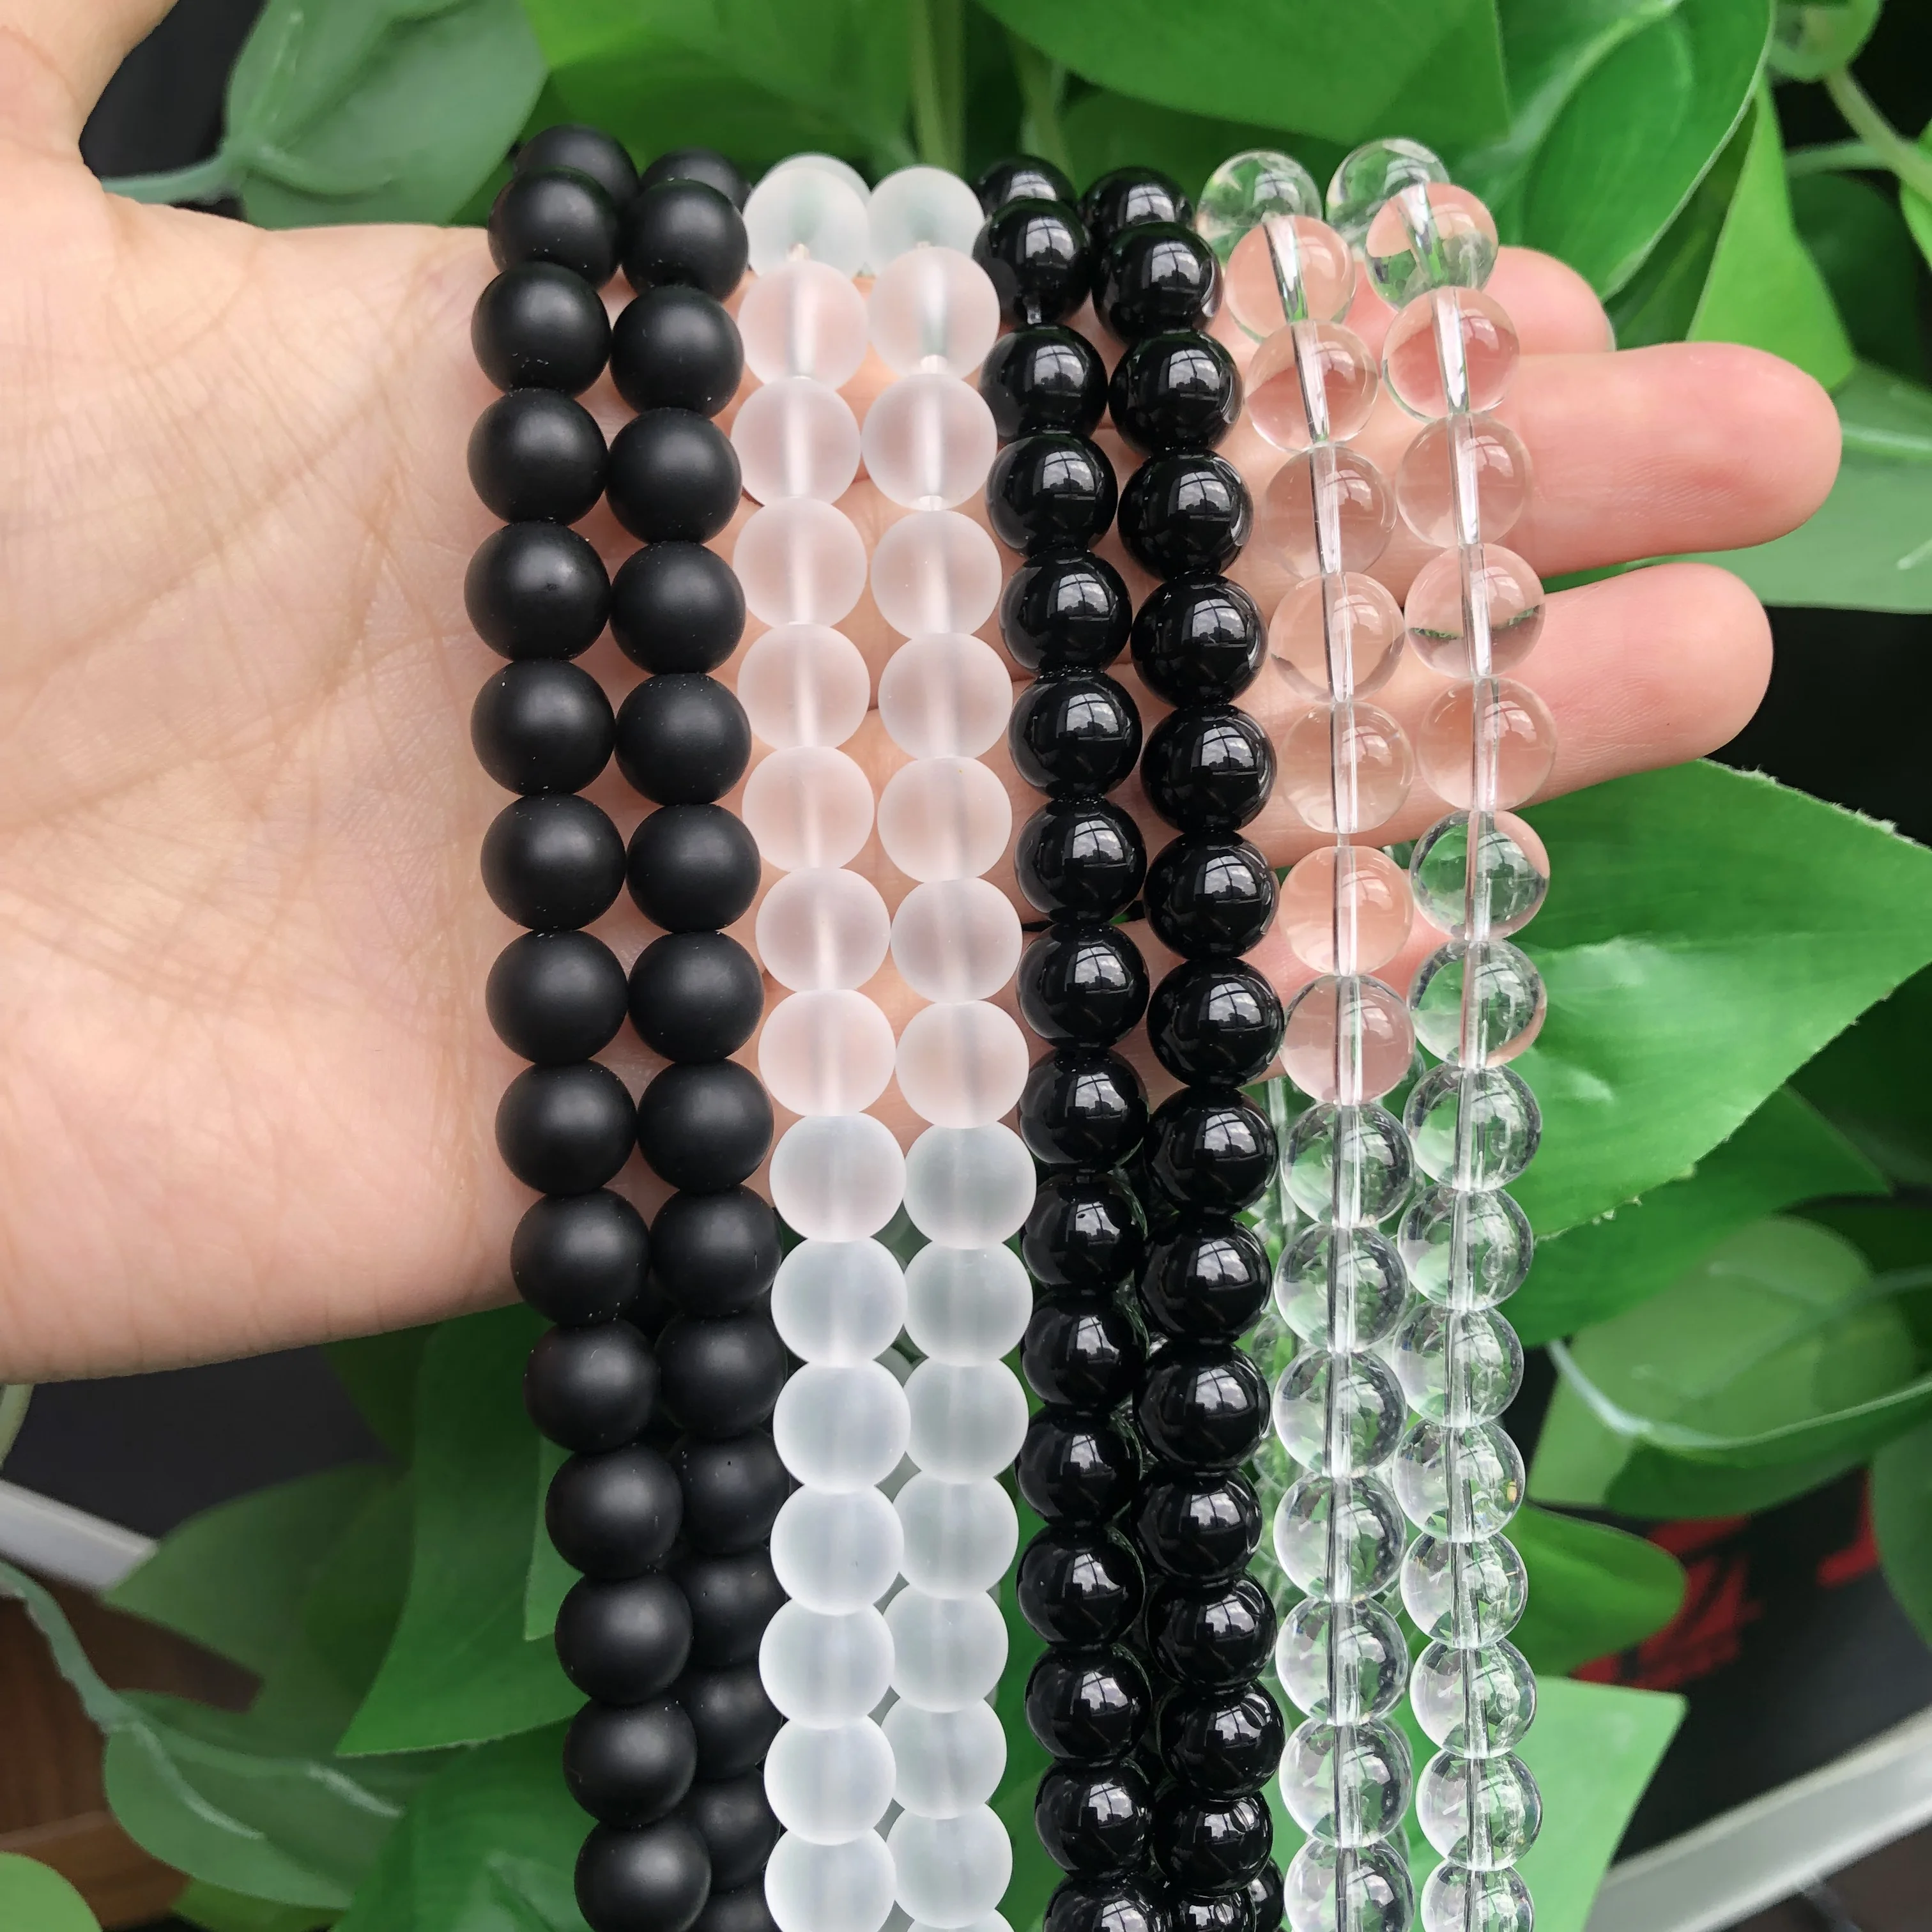 New 50pcs 7x12mm Colour AB Acrylic Bellflower Beads Caps Jewelry Findings  Charms Bracelets Spacer Beads for Jewelry Making - AliExpress